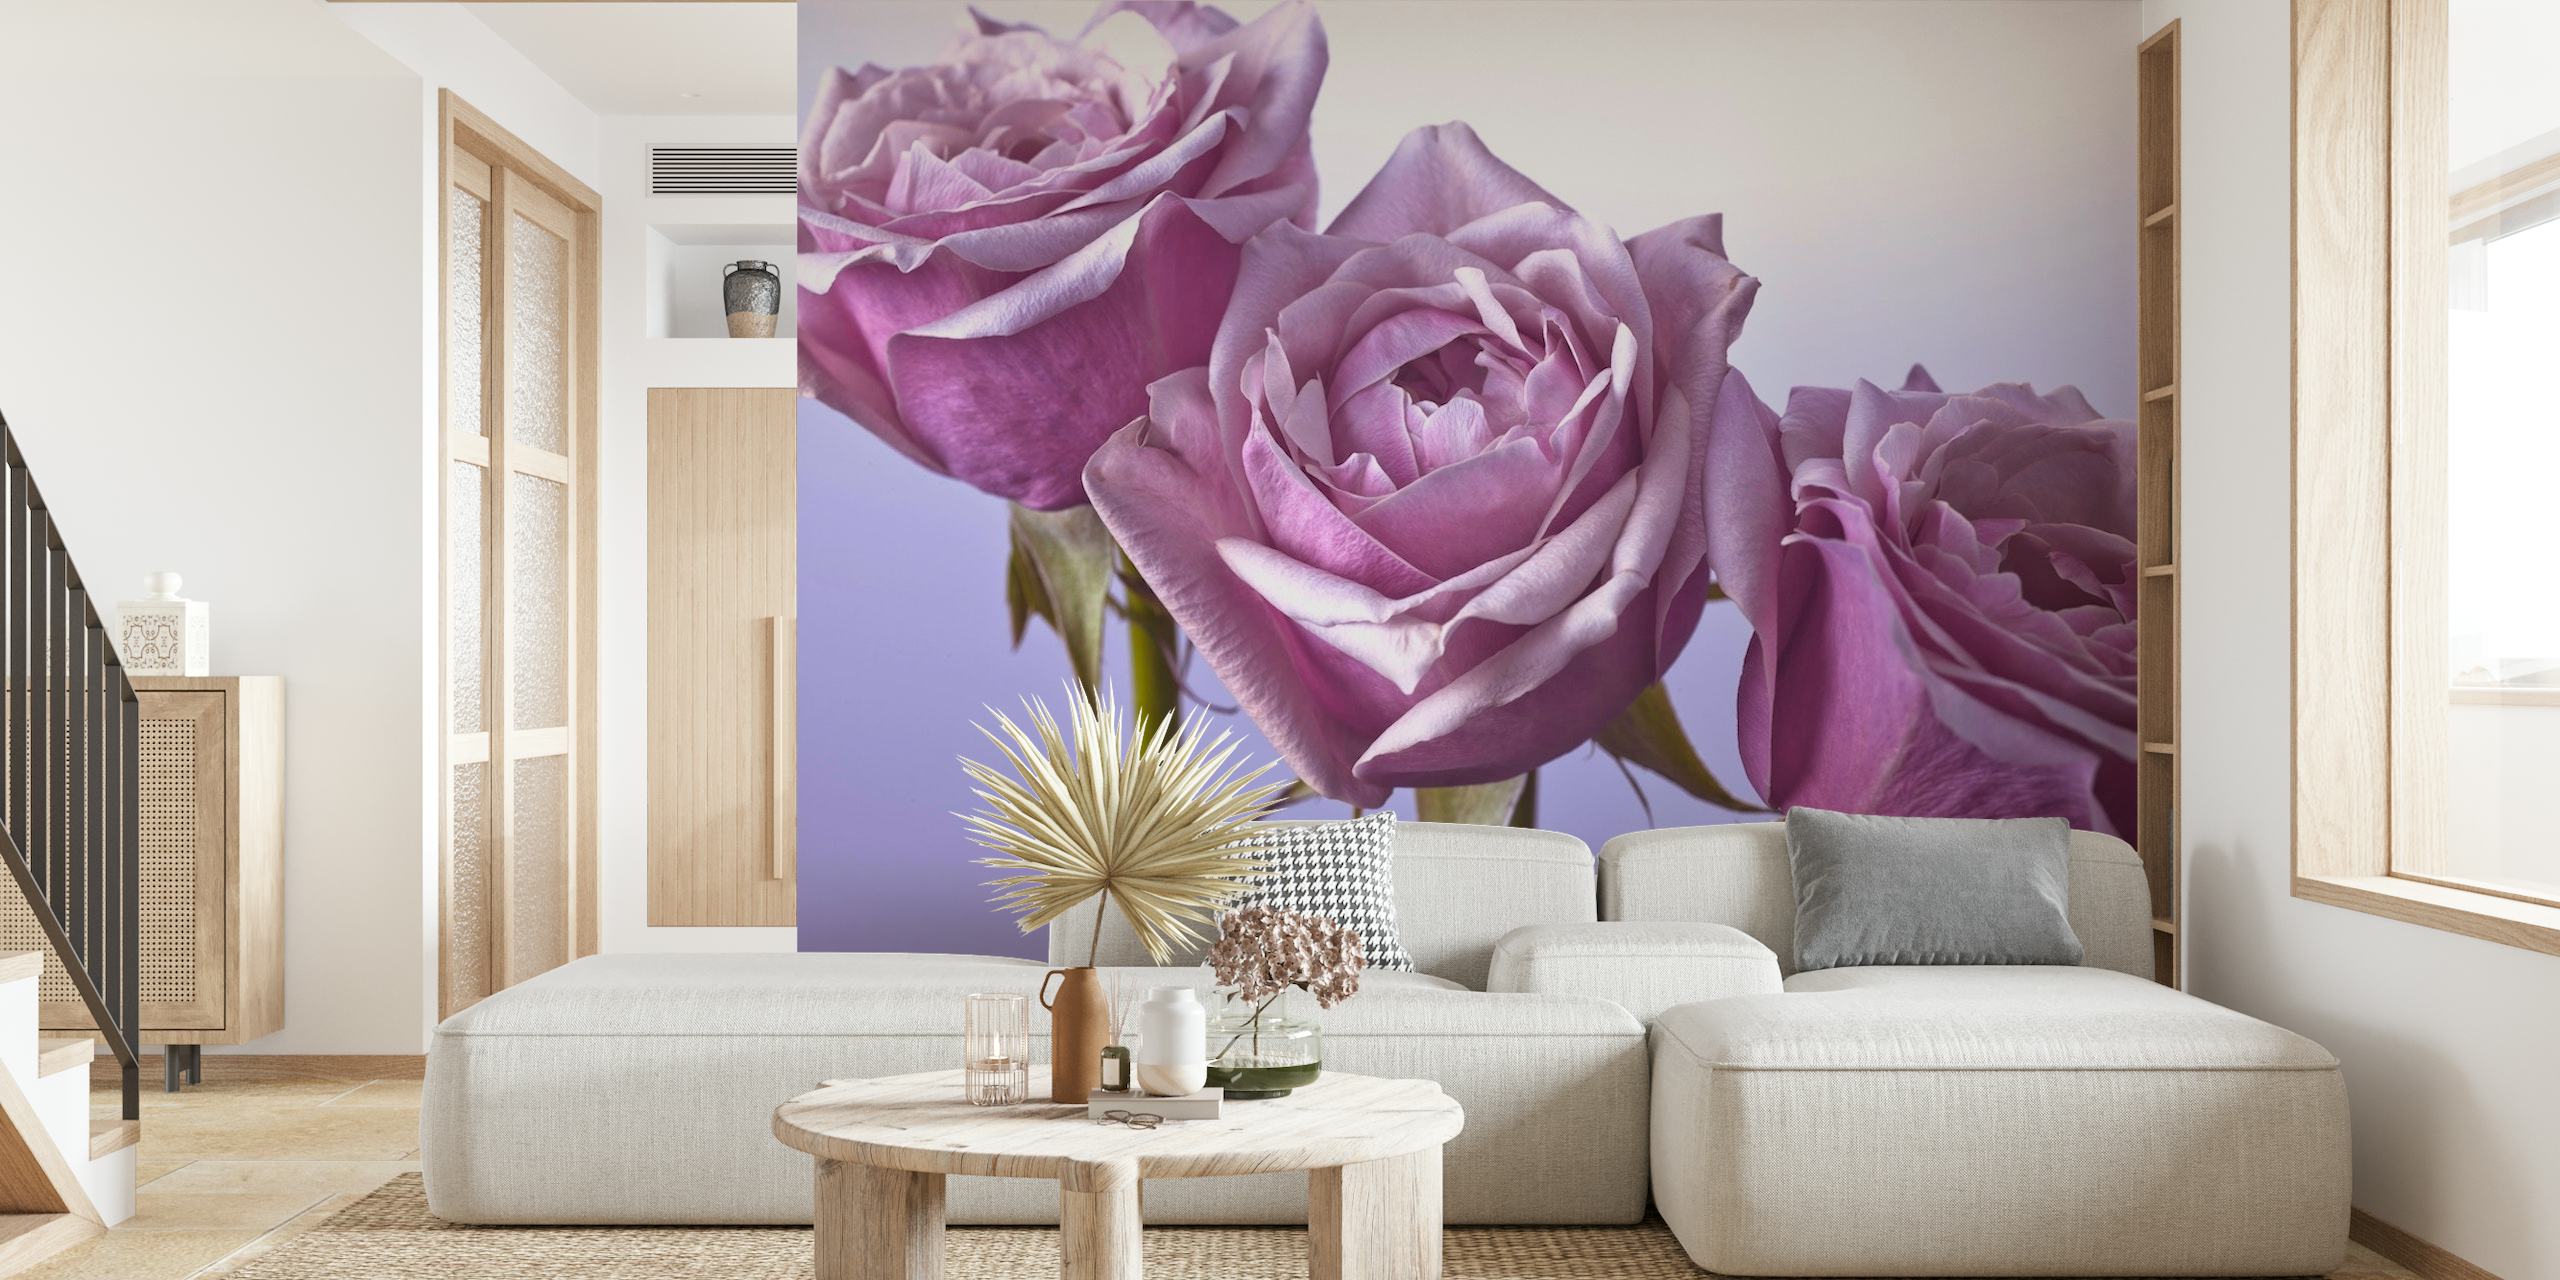 A detailed wall mural of three purple roses against a soft background